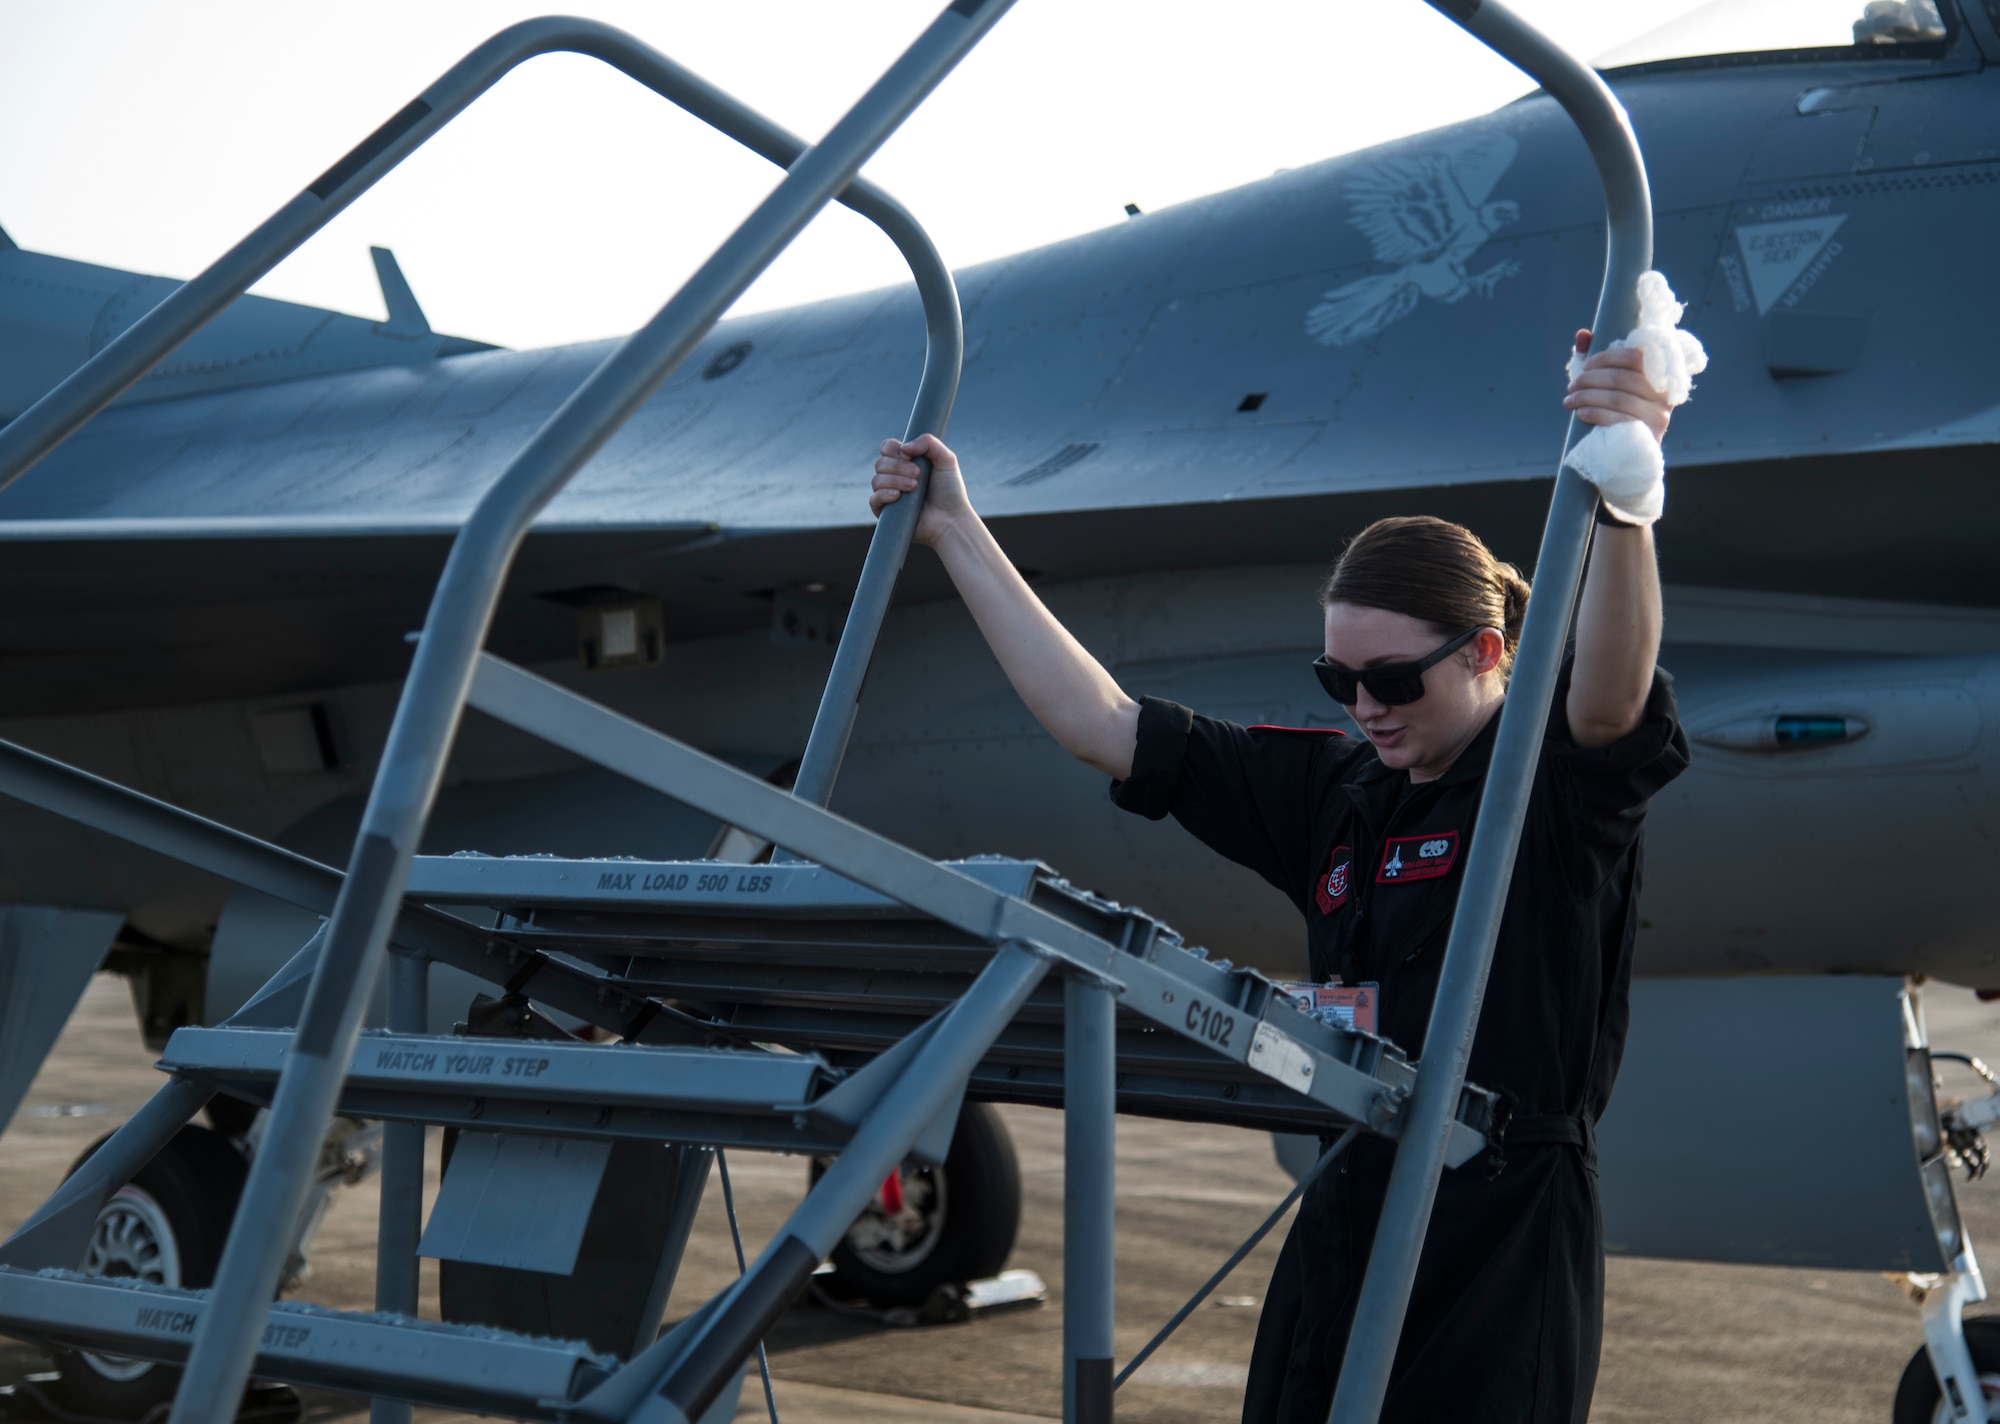 U.S. Air Force Senior Airman Emily Wall, a Pacific Air Forces' Demonstration Team crew chief, moves aircraft steps at Paya Lebar Air Base, Singapore, Feb. 3, 2018. Wall had an opportunity to be one of the few female Airmen who have worked on the team and reinforced international relations between the U.S. and its allies through demo performances. (U.S. Air Force photo by Senior Airman Sadie Colbert)